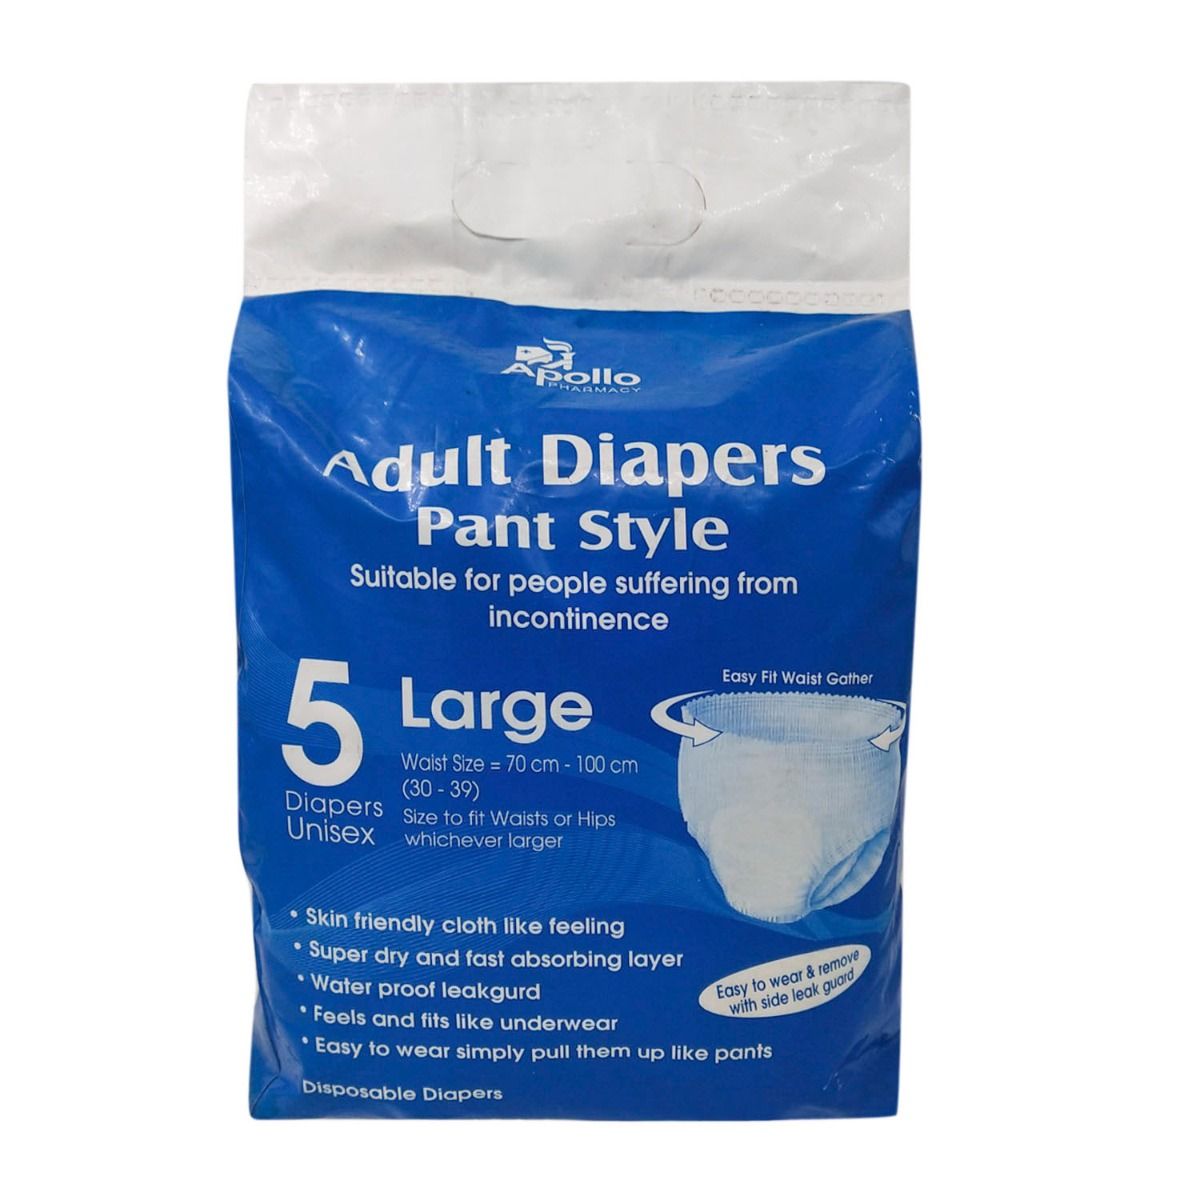 Buy Apollo Pharmacy Adult Diapers Pants Large, 5 Count Online